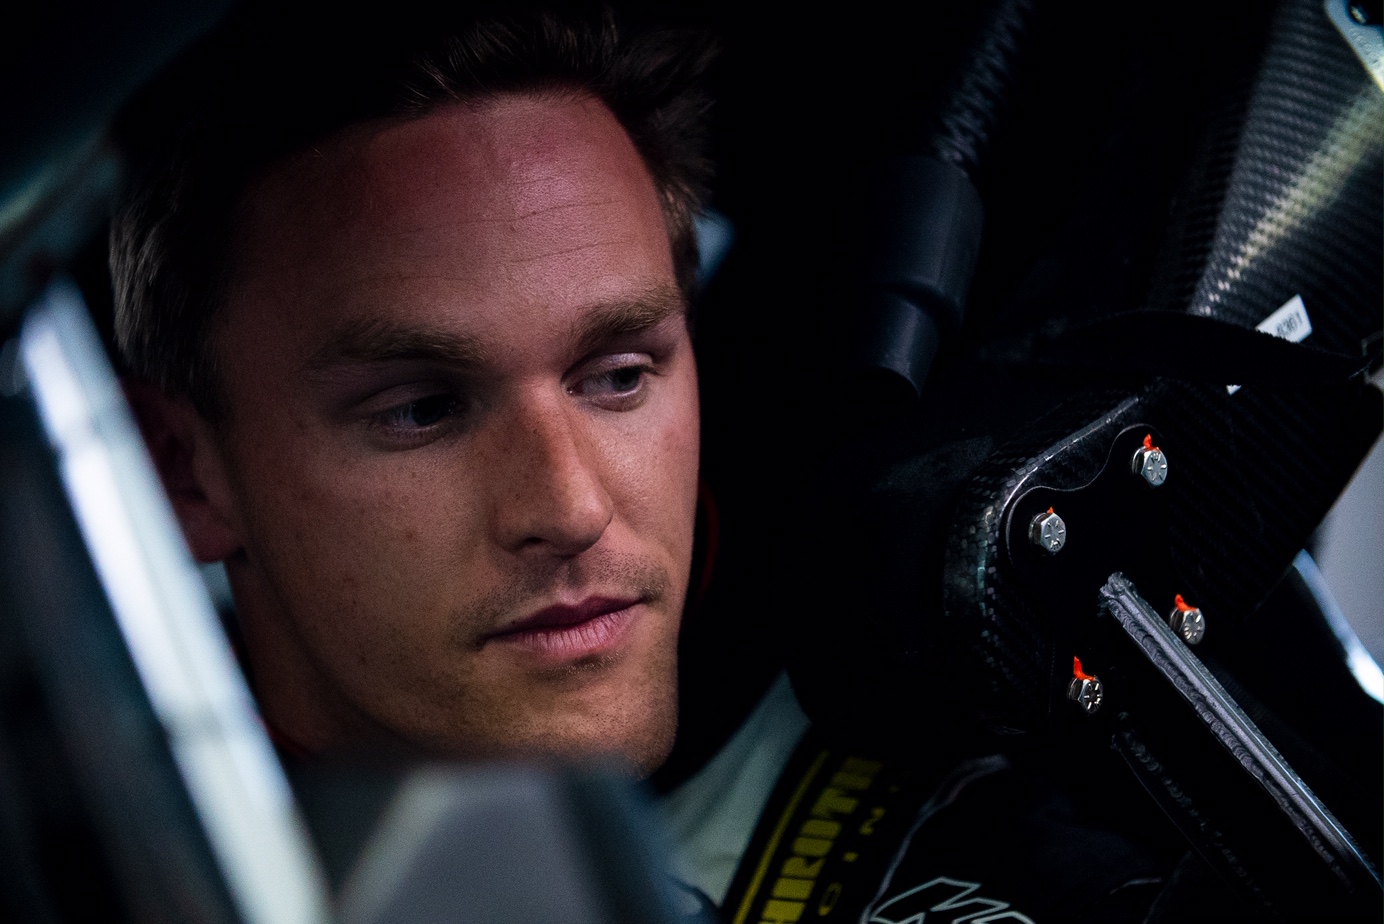 Humorous but determined, Parker Kligerman races with gusto. (Photo Credit: Chris Taylor)